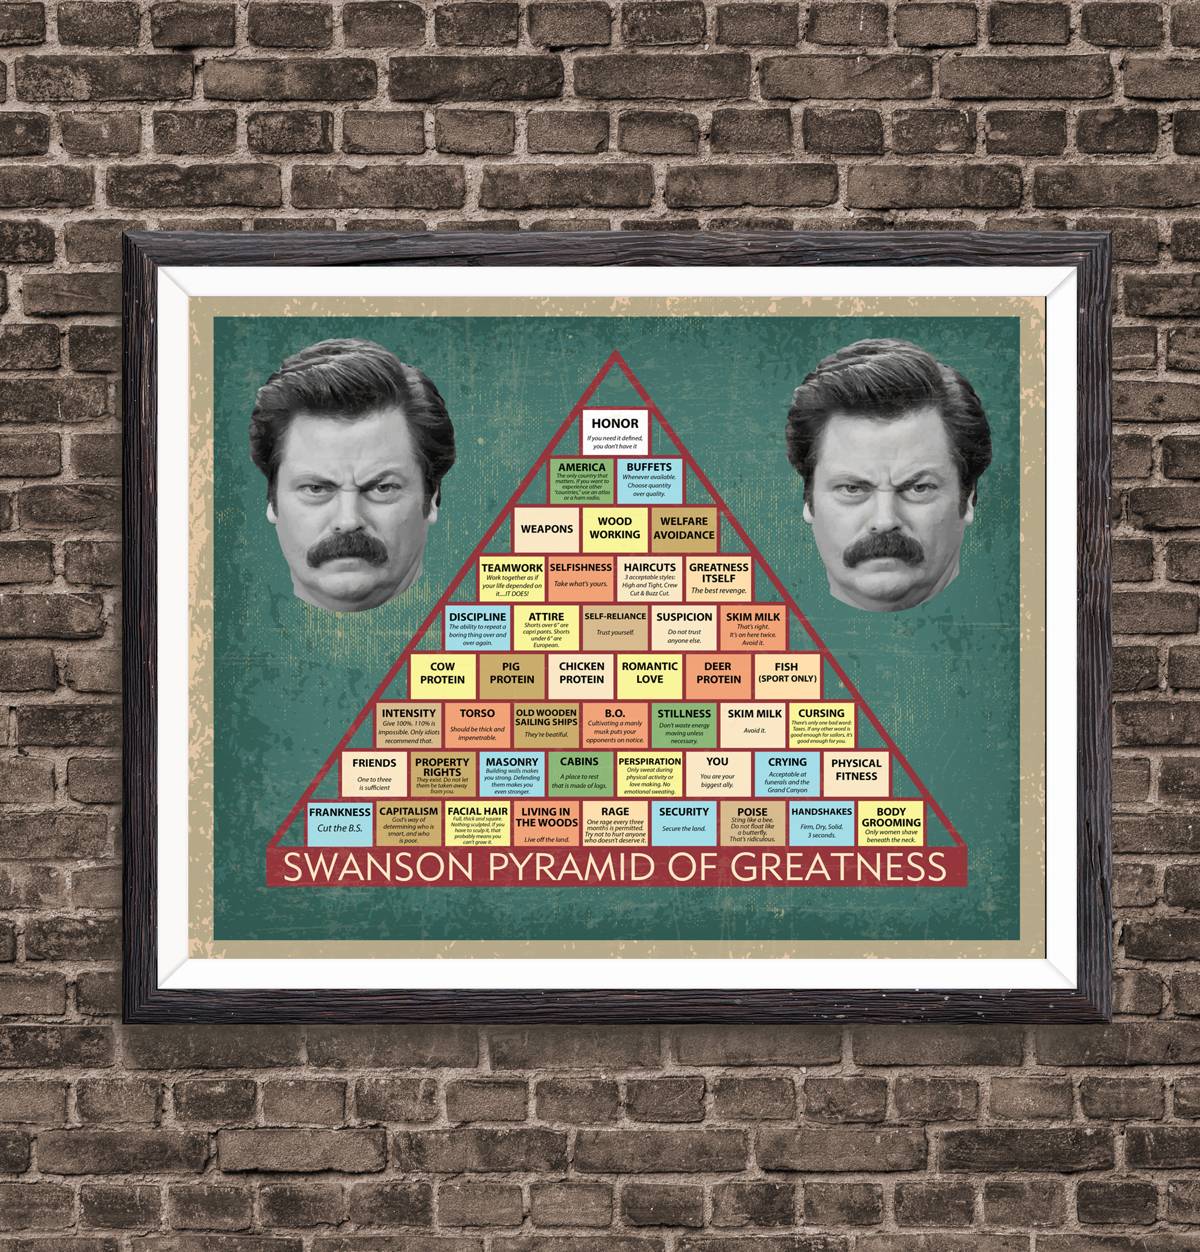 Ron Swanson Pyramid Of Greatness Poster Art Print, Parks And Recreation